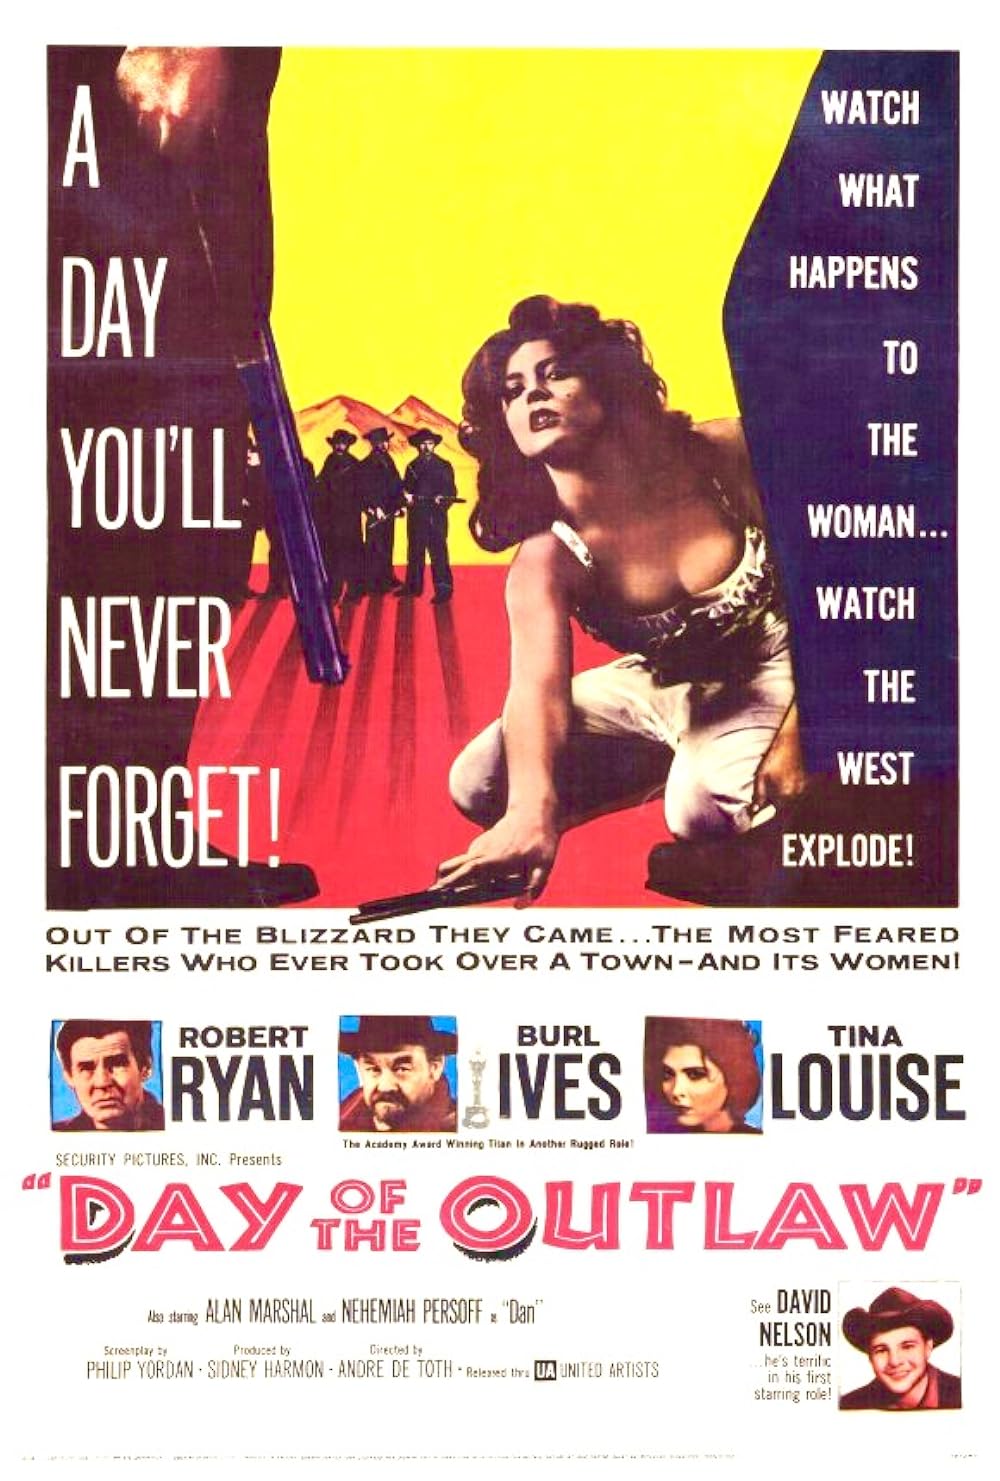 Poster for the film Day of the Outlaw